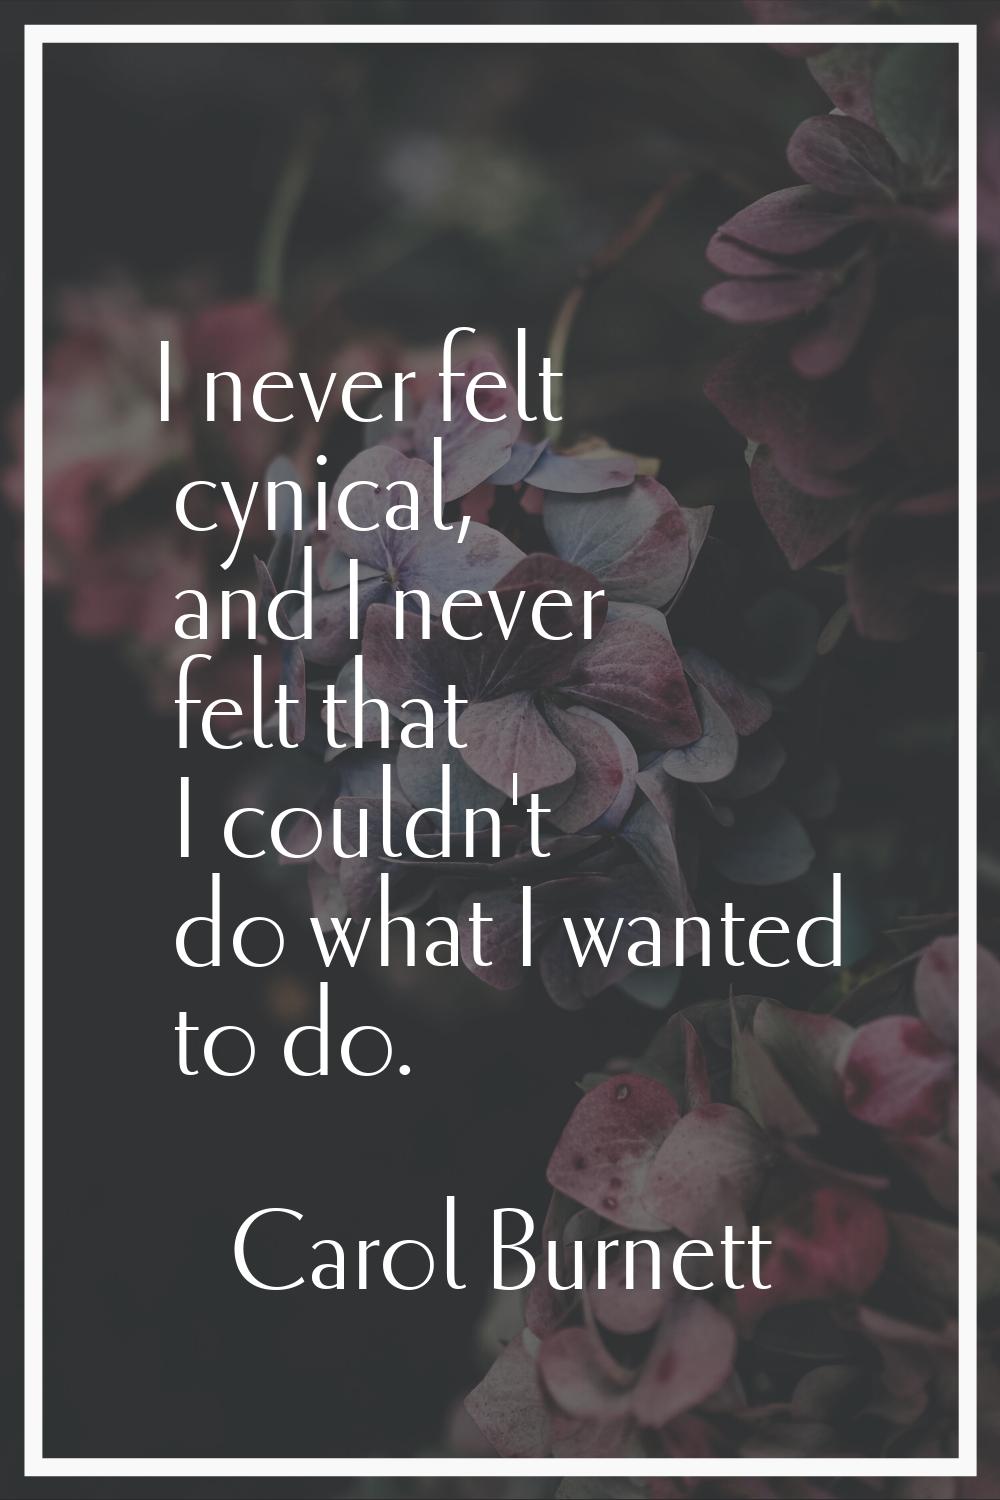 I never felt cynical, and I never felt that I couldn't do what I wanted to do.